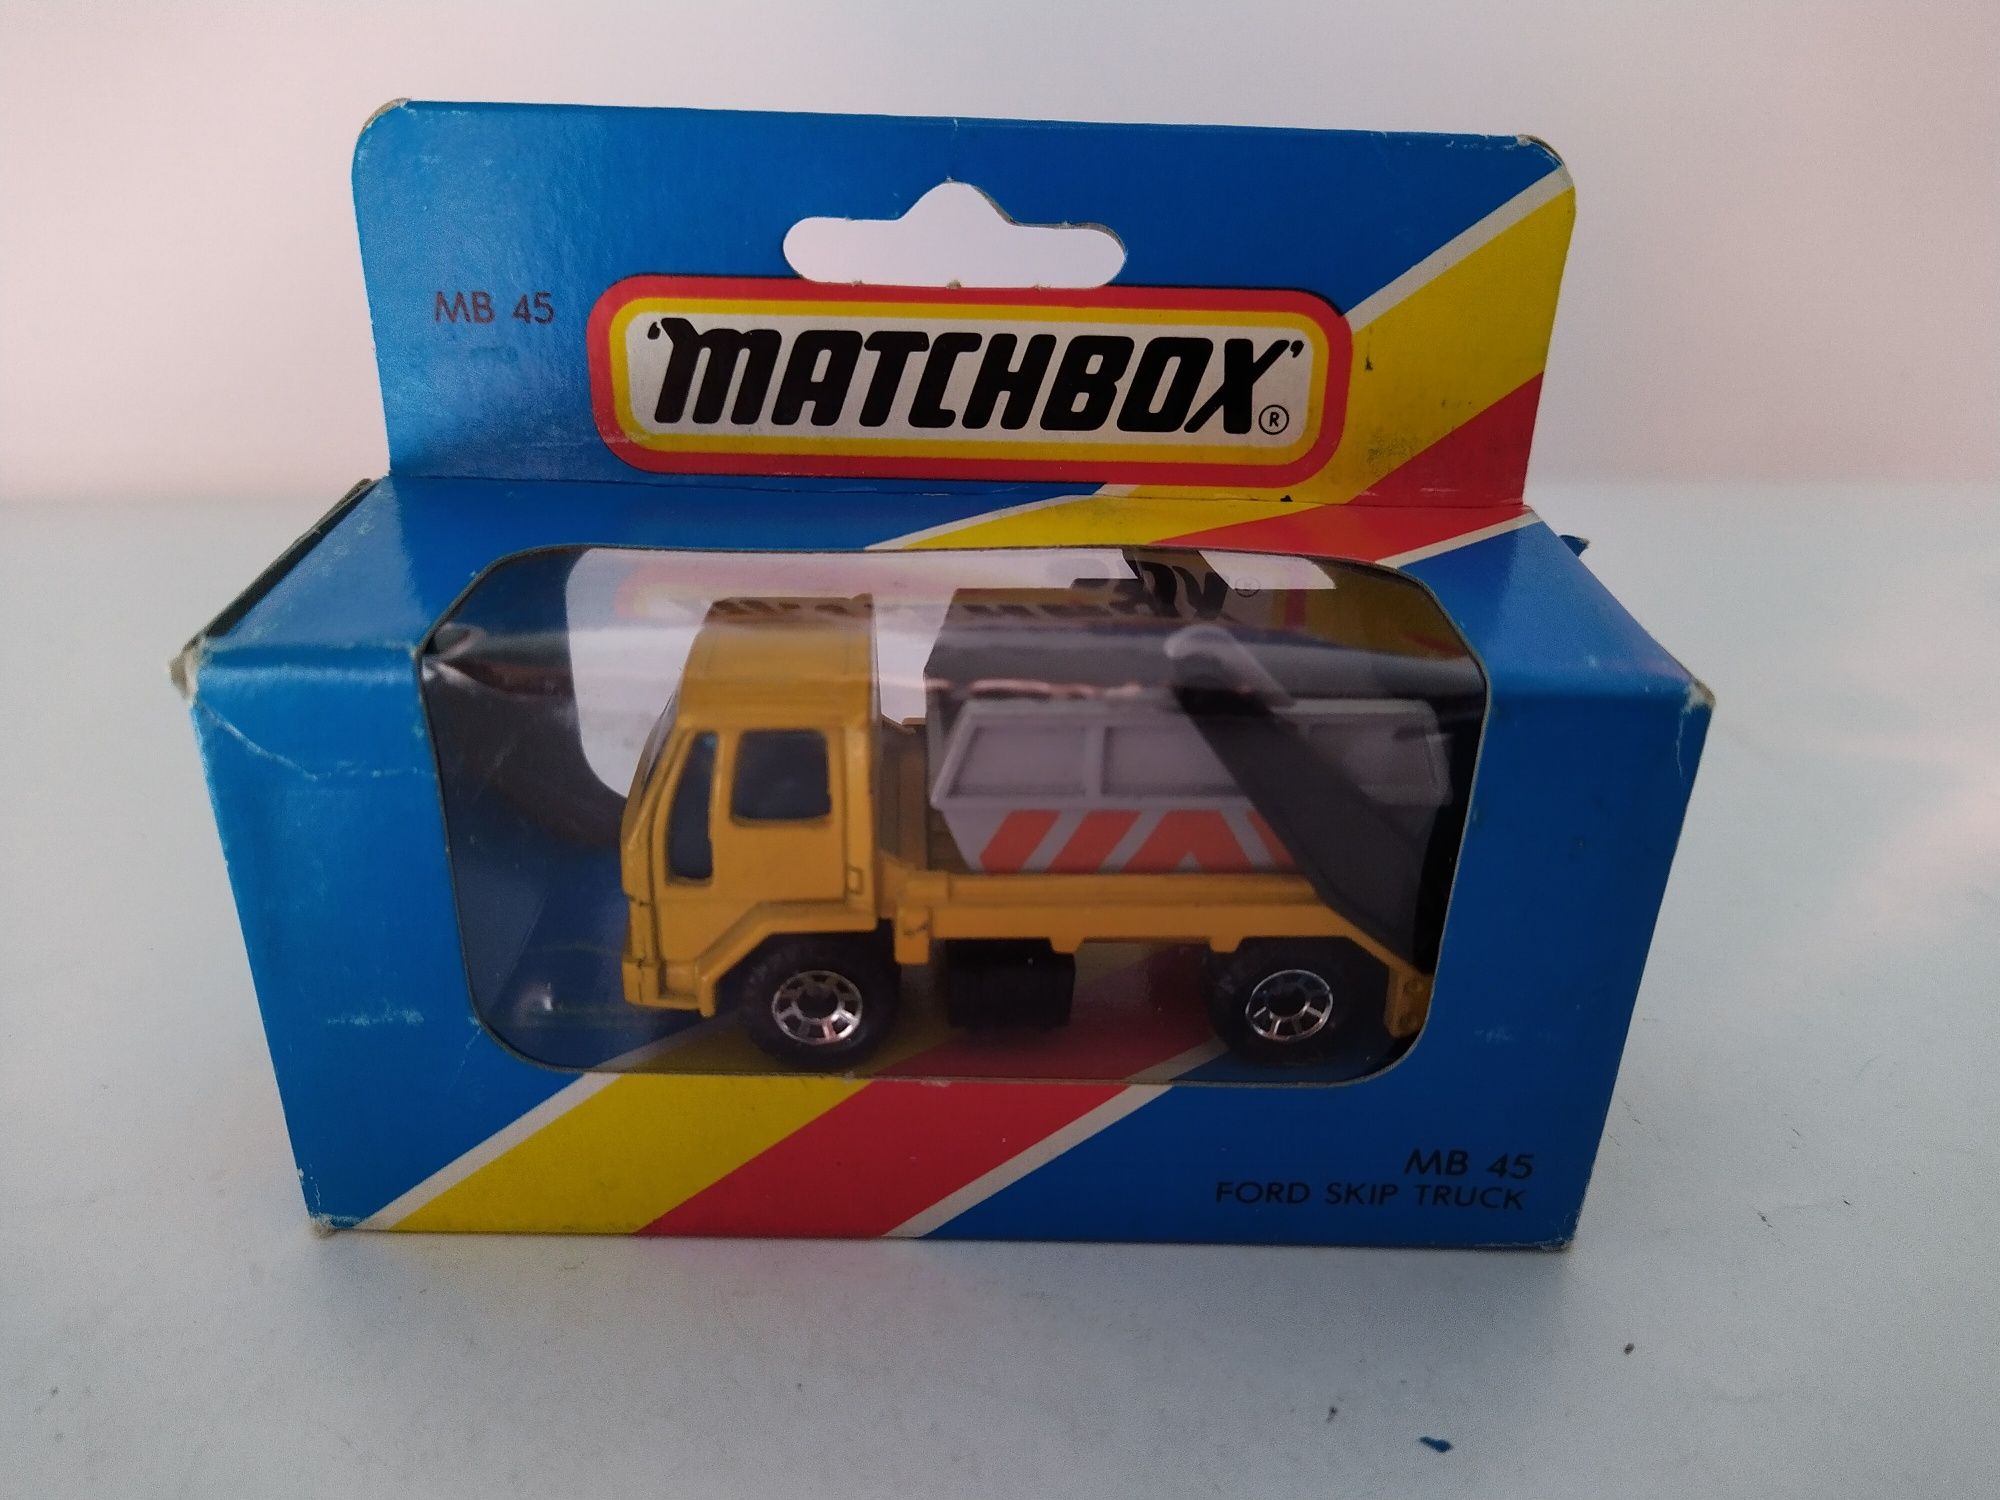 Ford Camion Container MB 40 Matchbox pudełko